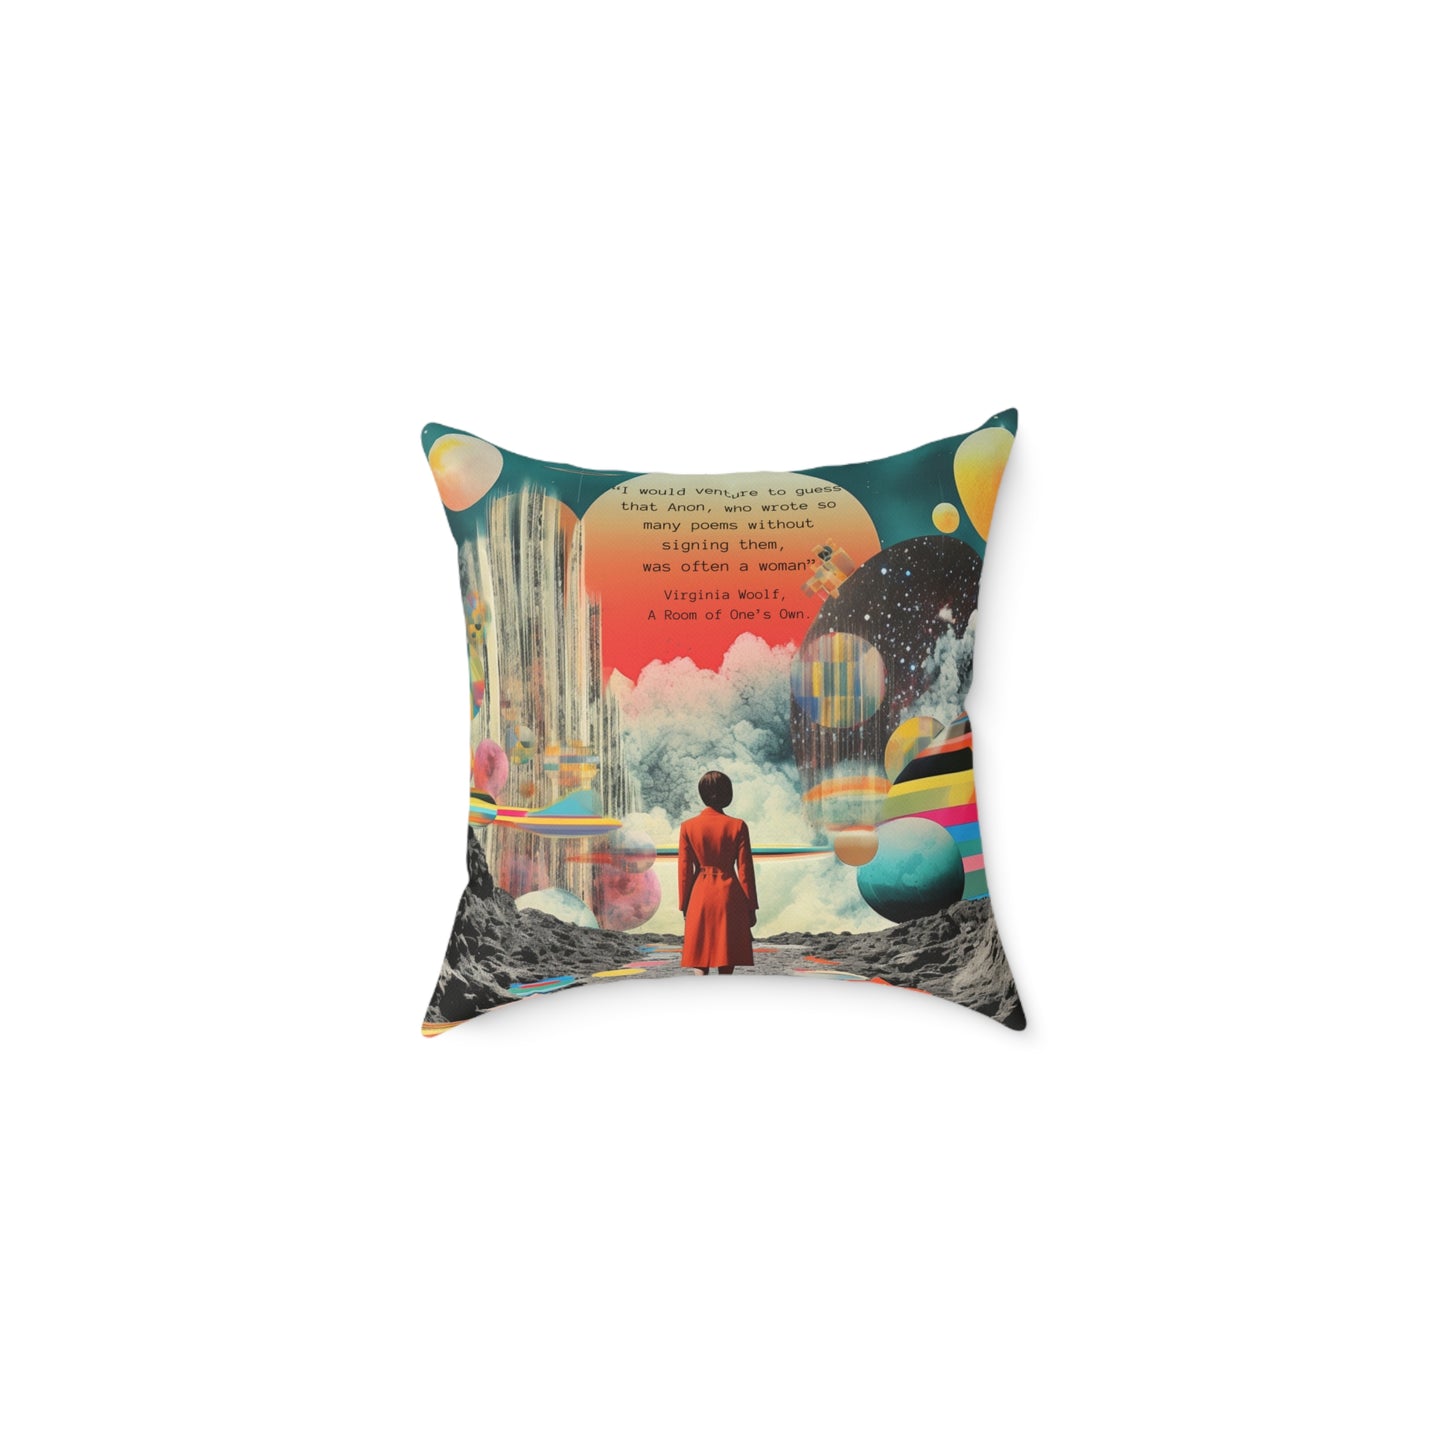 "Anon" Virginia Woolf, A Room of One’s Own Quote Cushion